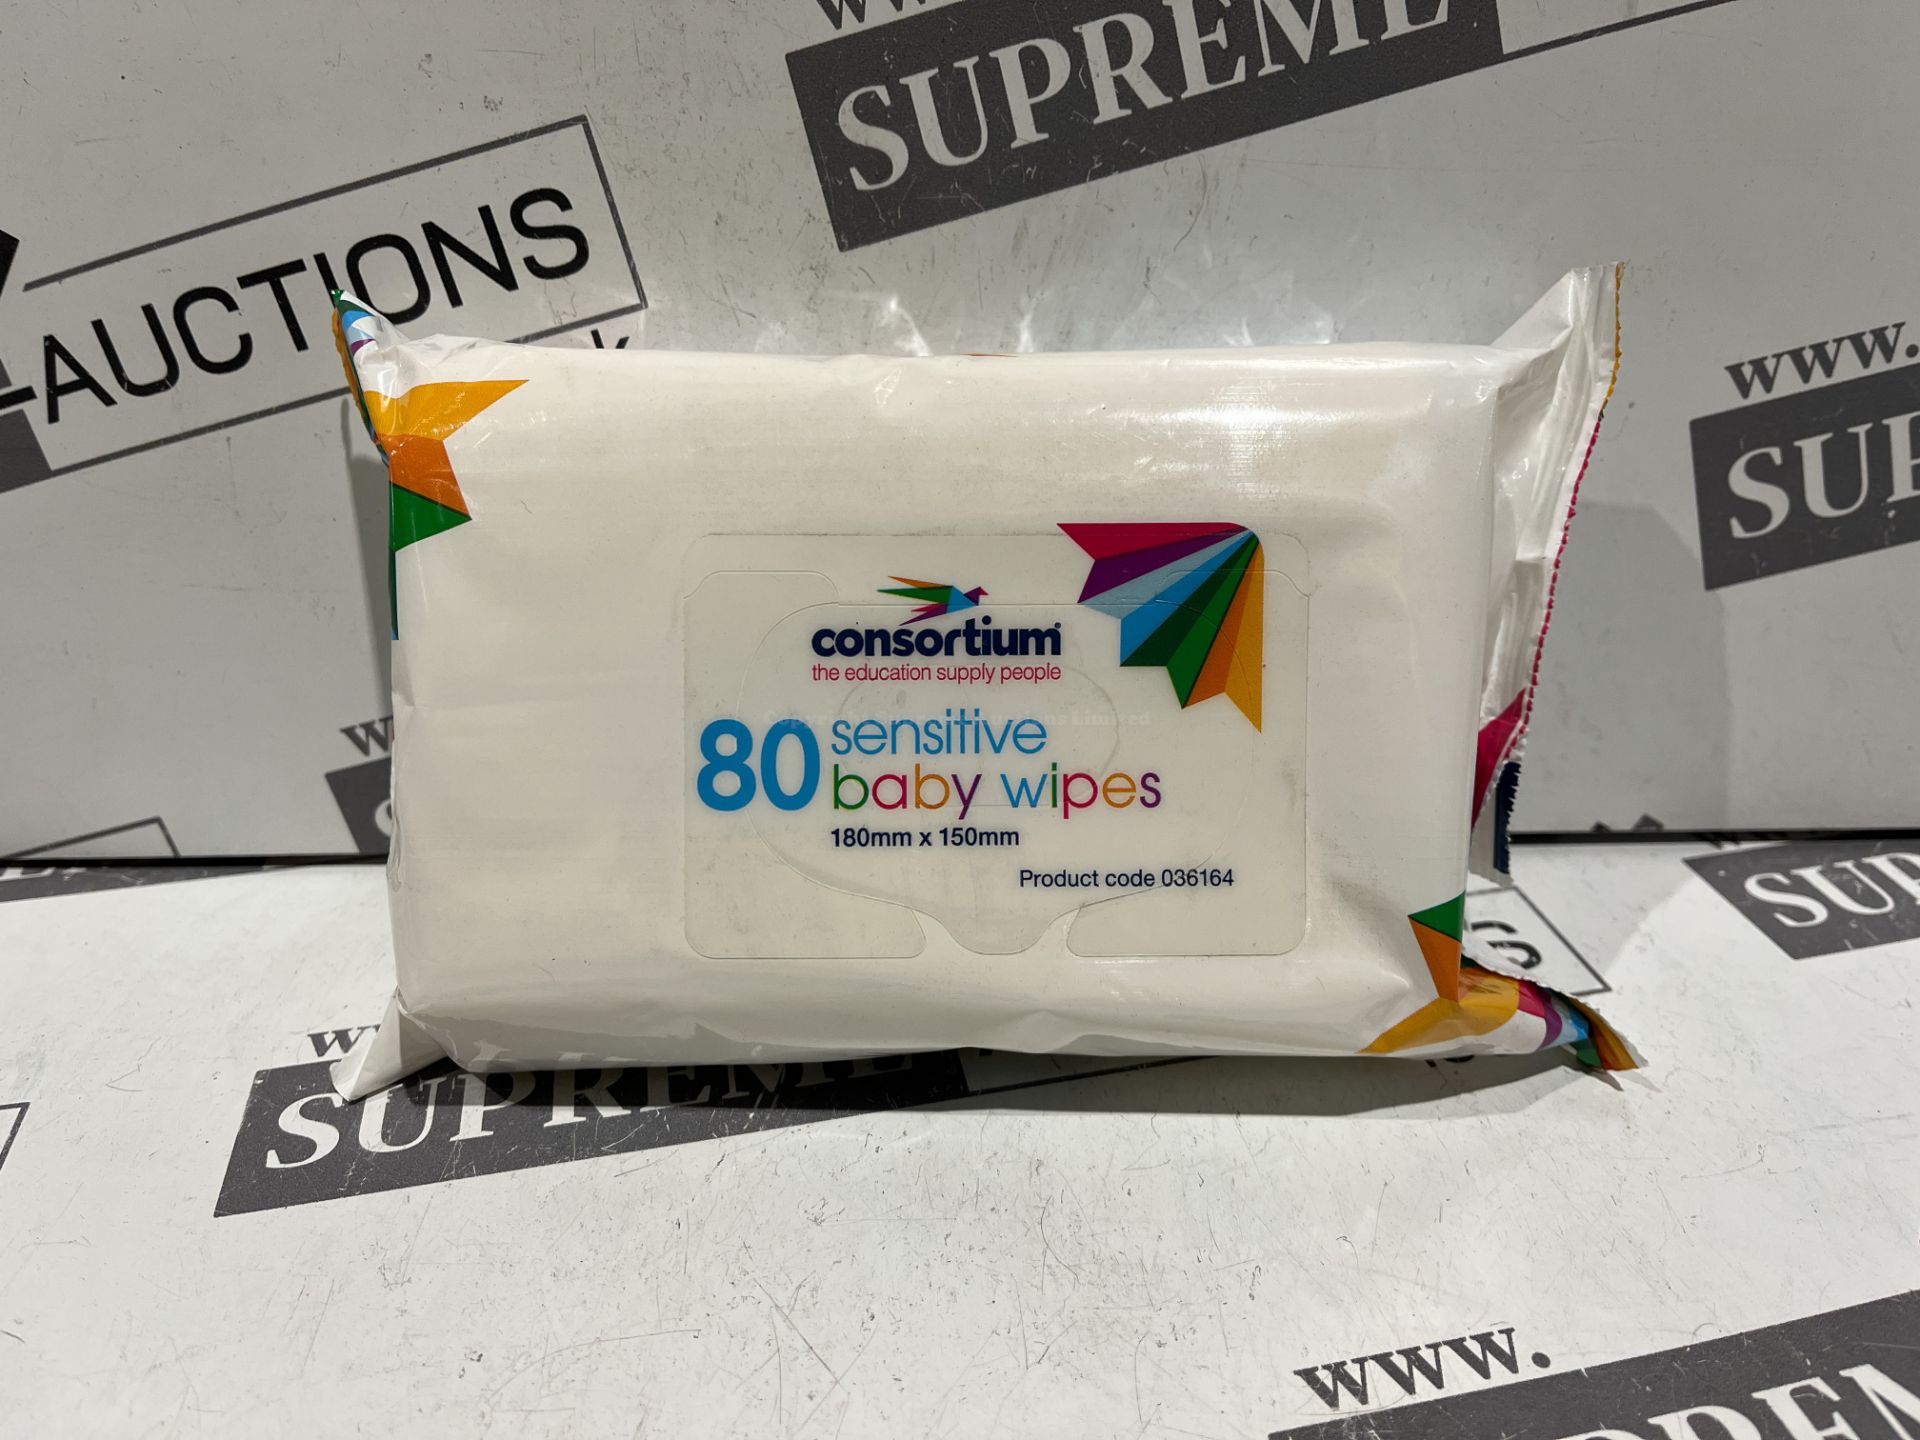 50 X BRAND NEW PACKS OF 80 180MM X 150MM SENSITIVE BABY WIPES EXP JAN 2025 R18-8